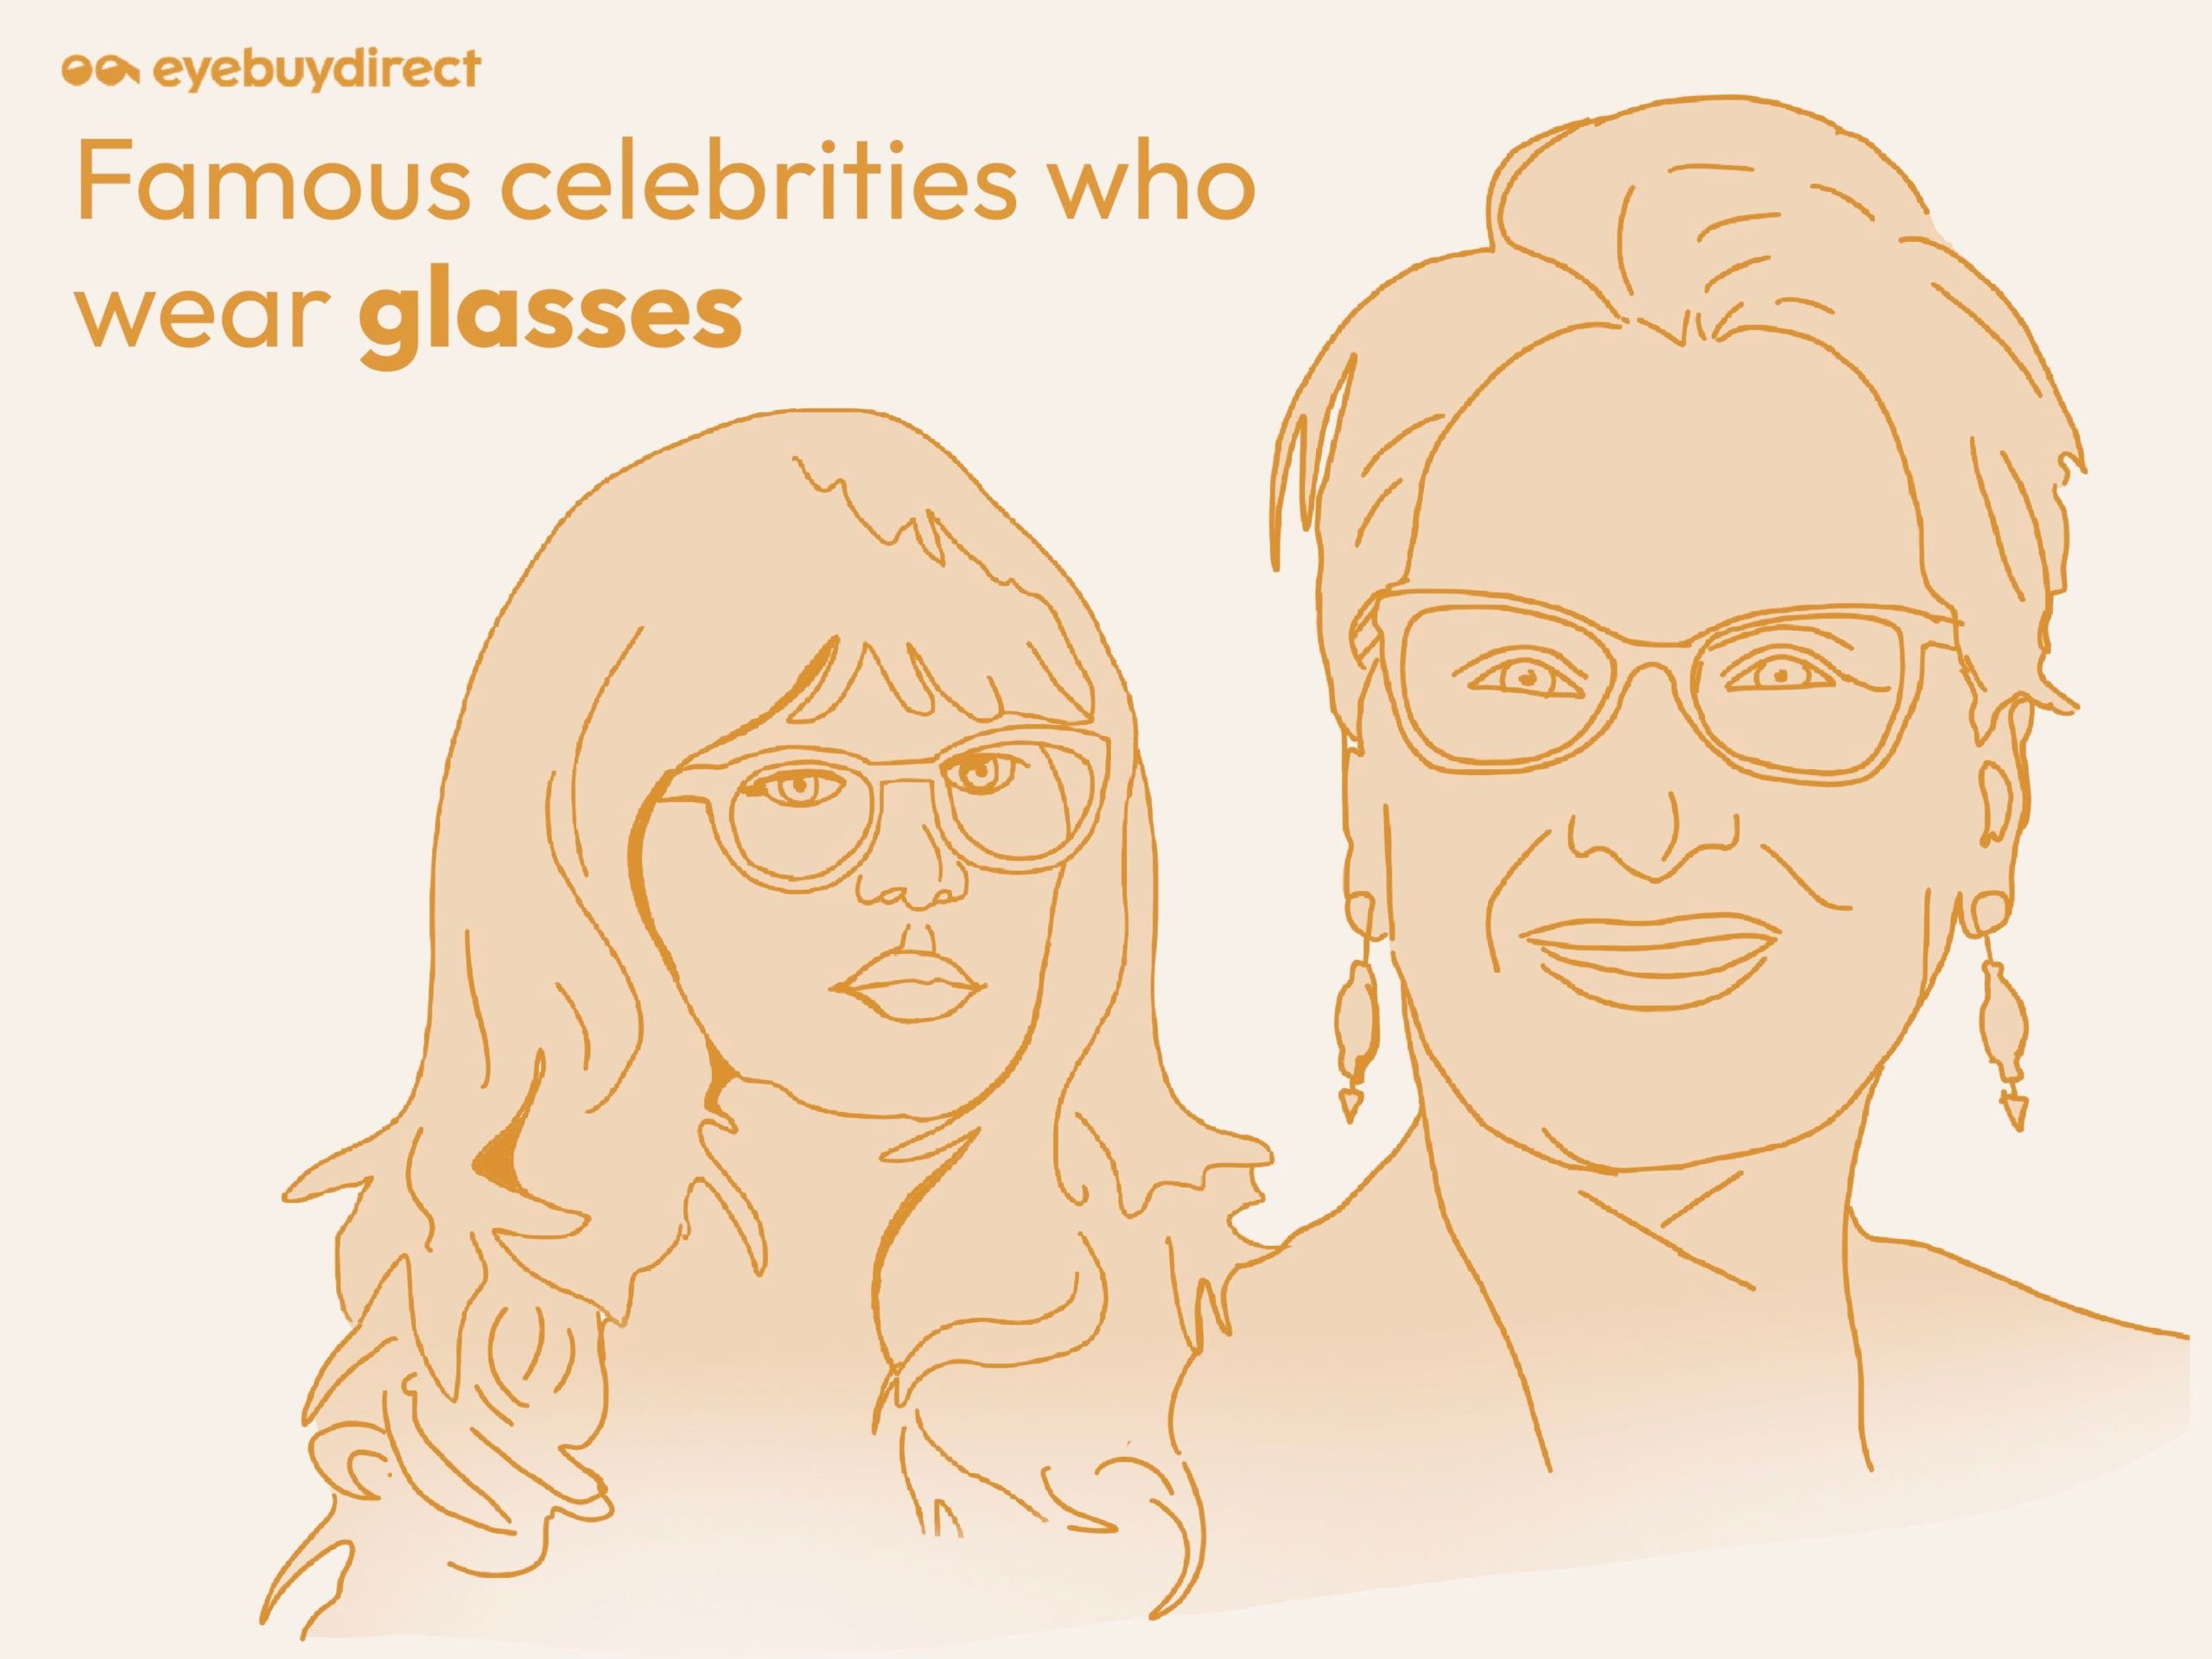 A stylised image showing celebrities wearing glasses